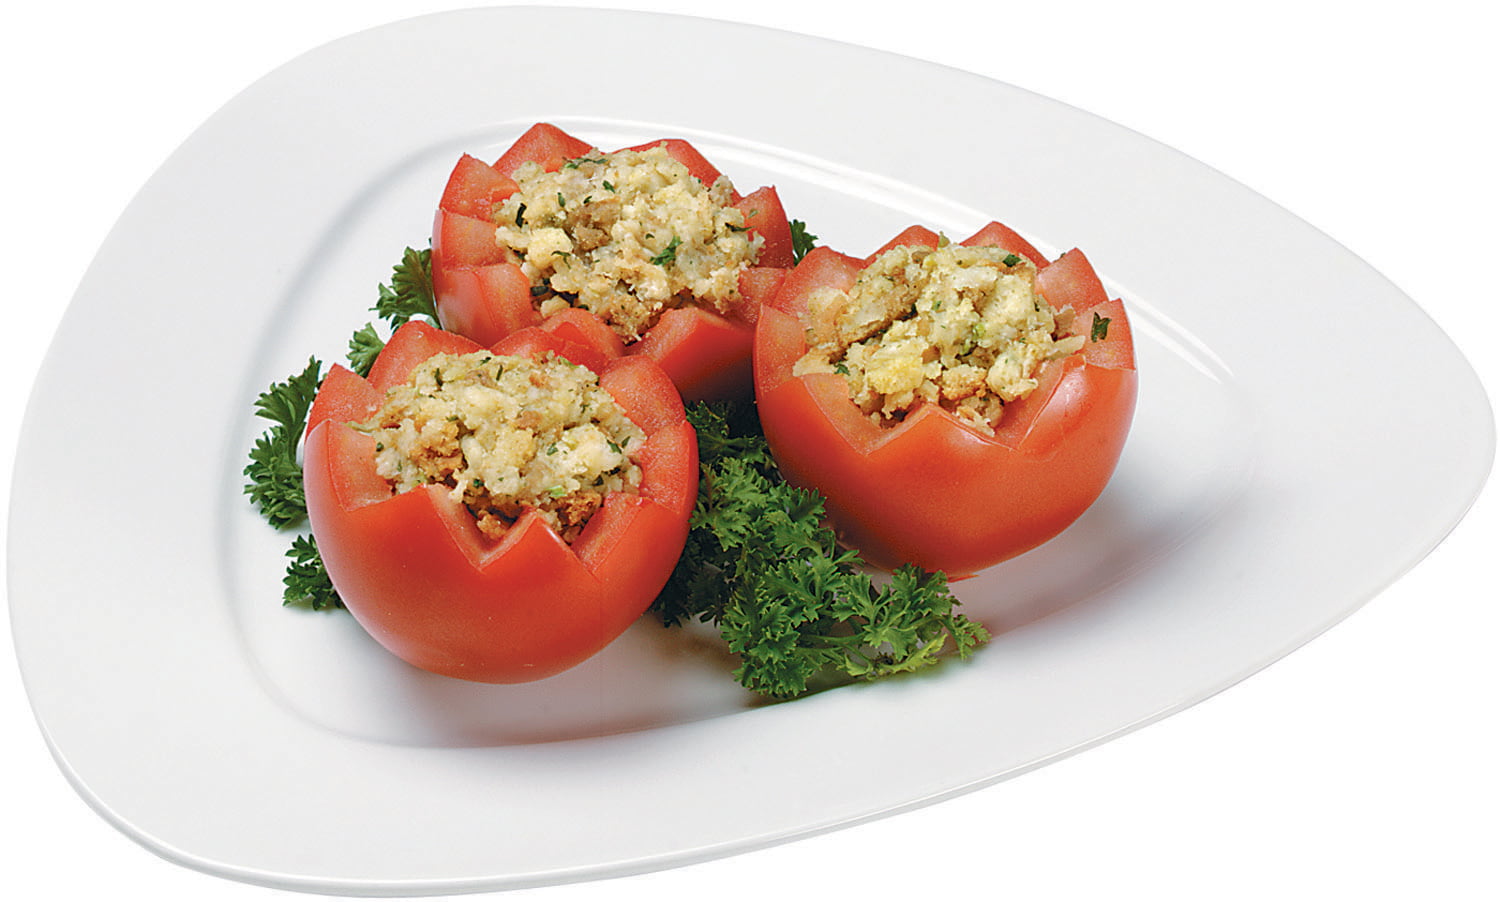 Stuffed Tomatoes on a Plate Food Picture